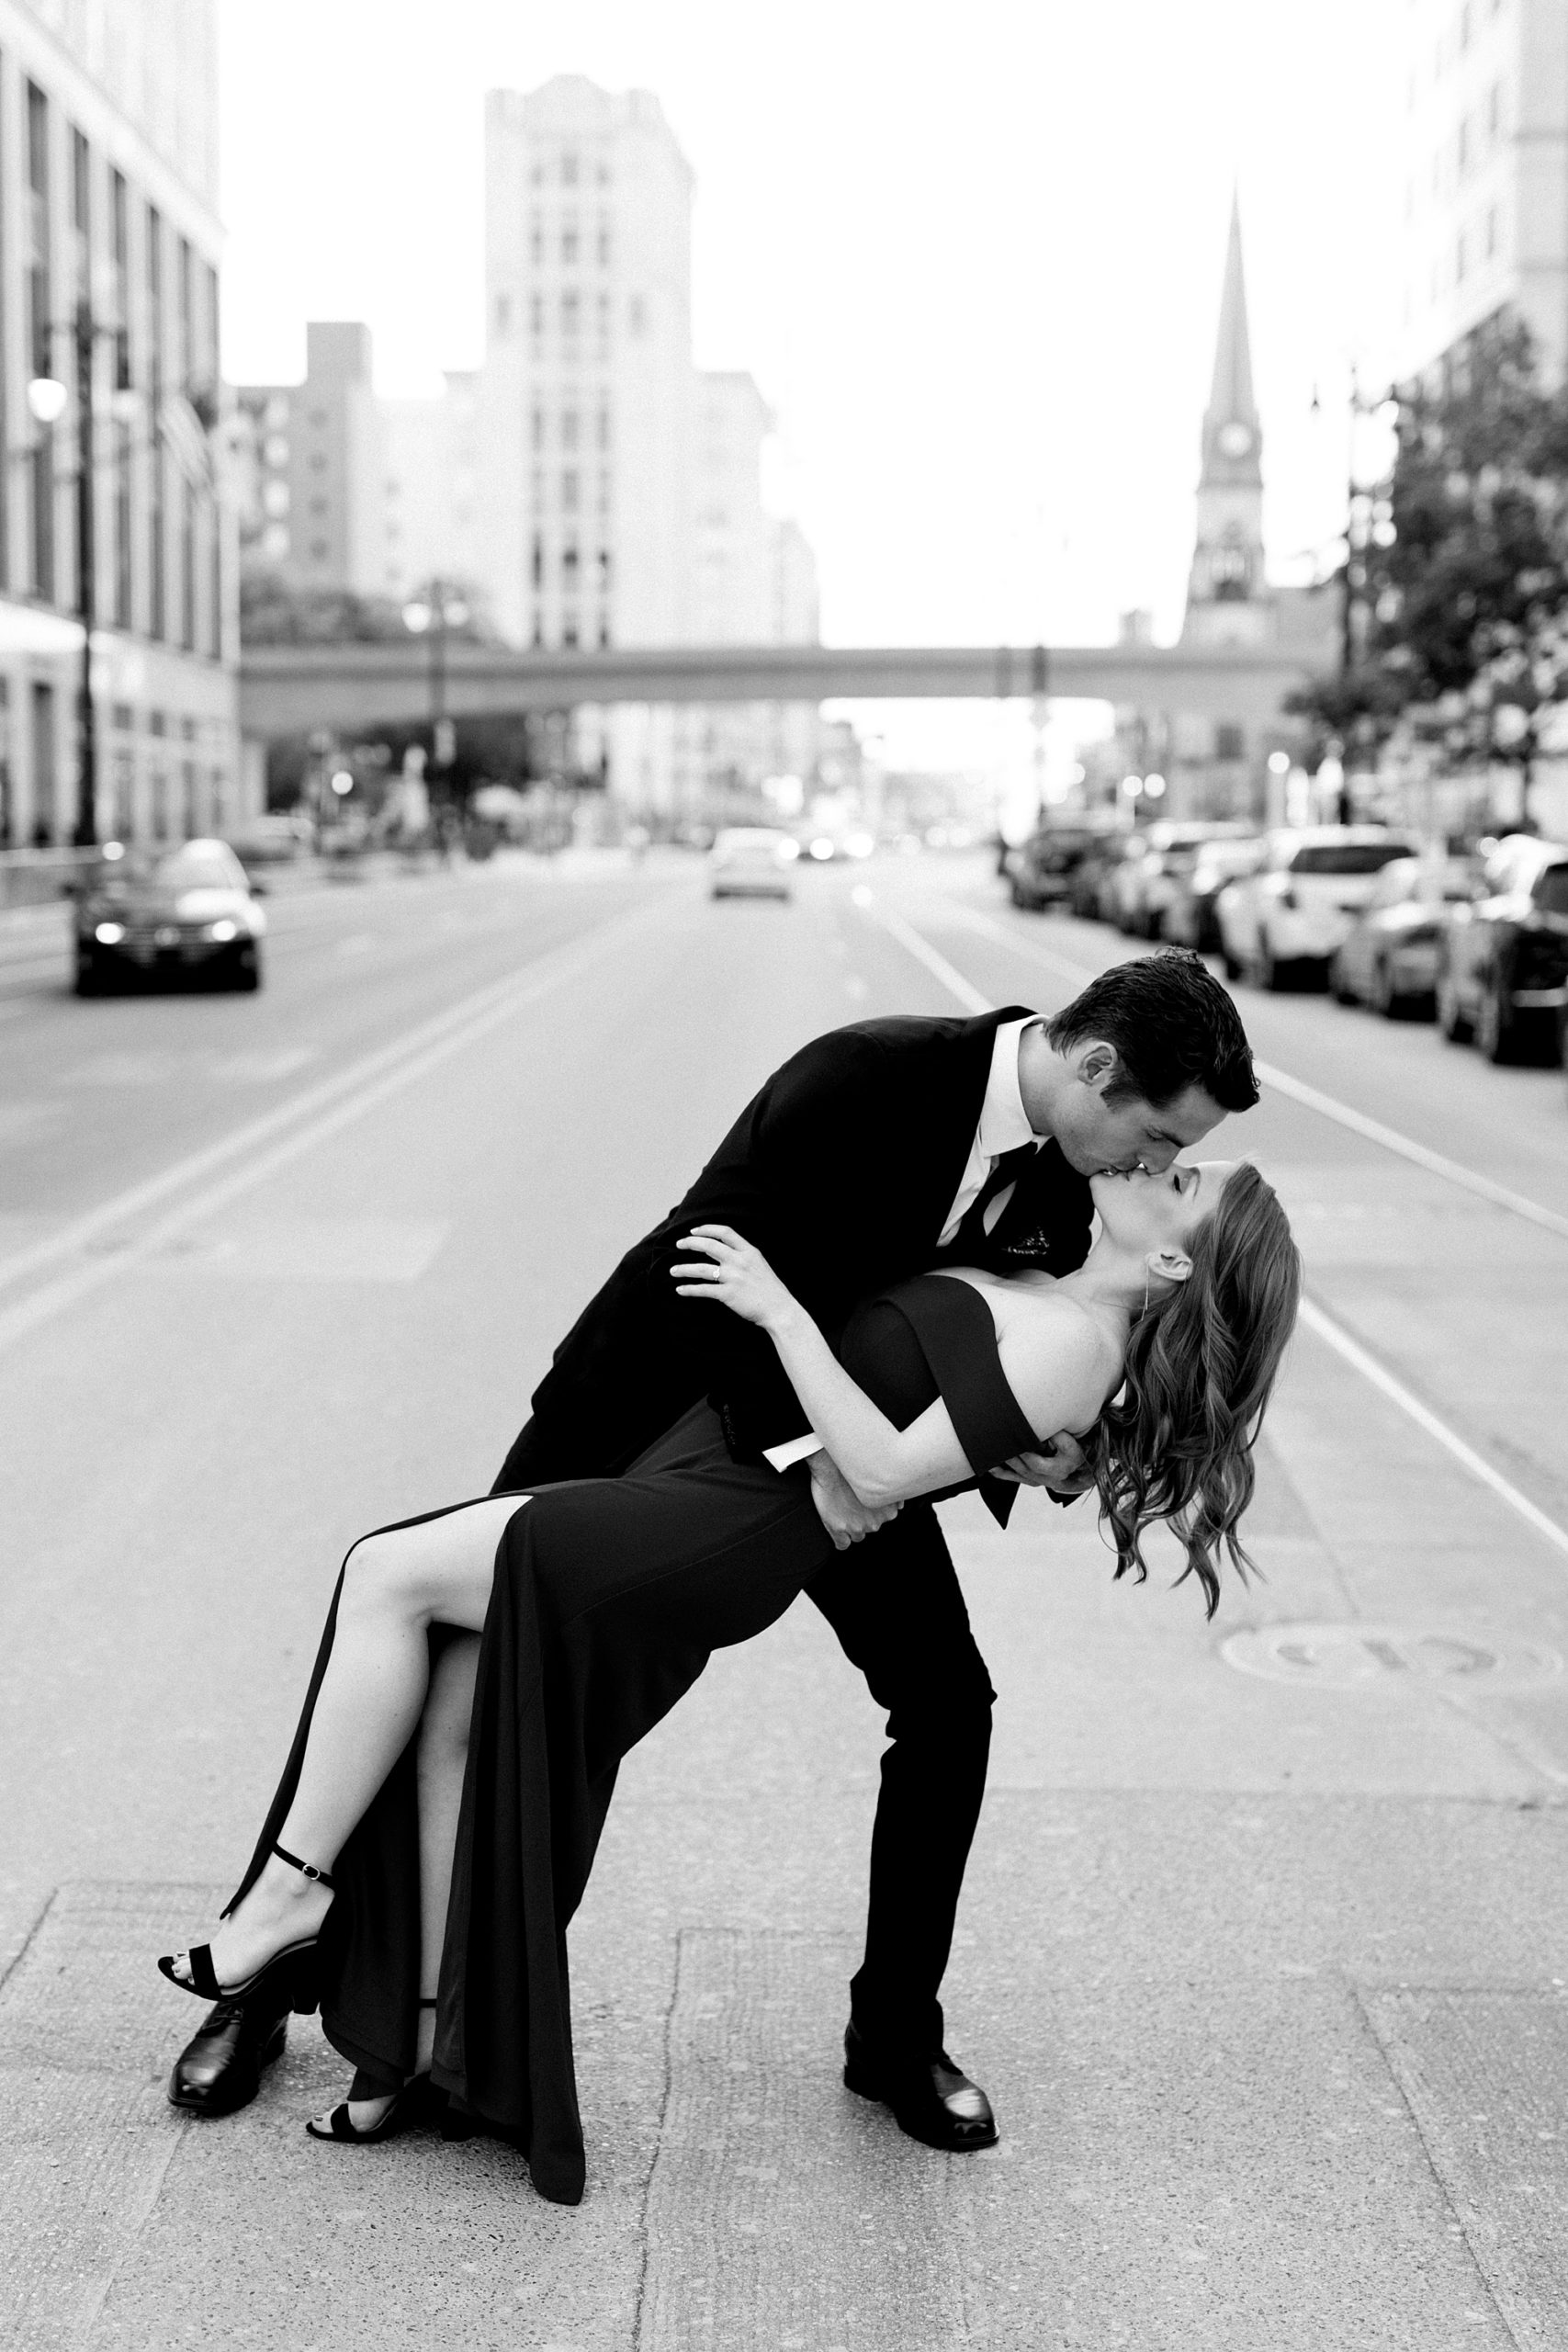 Kiss and dip photo in the city streets | Detroit | Breanne Rochelle Photography